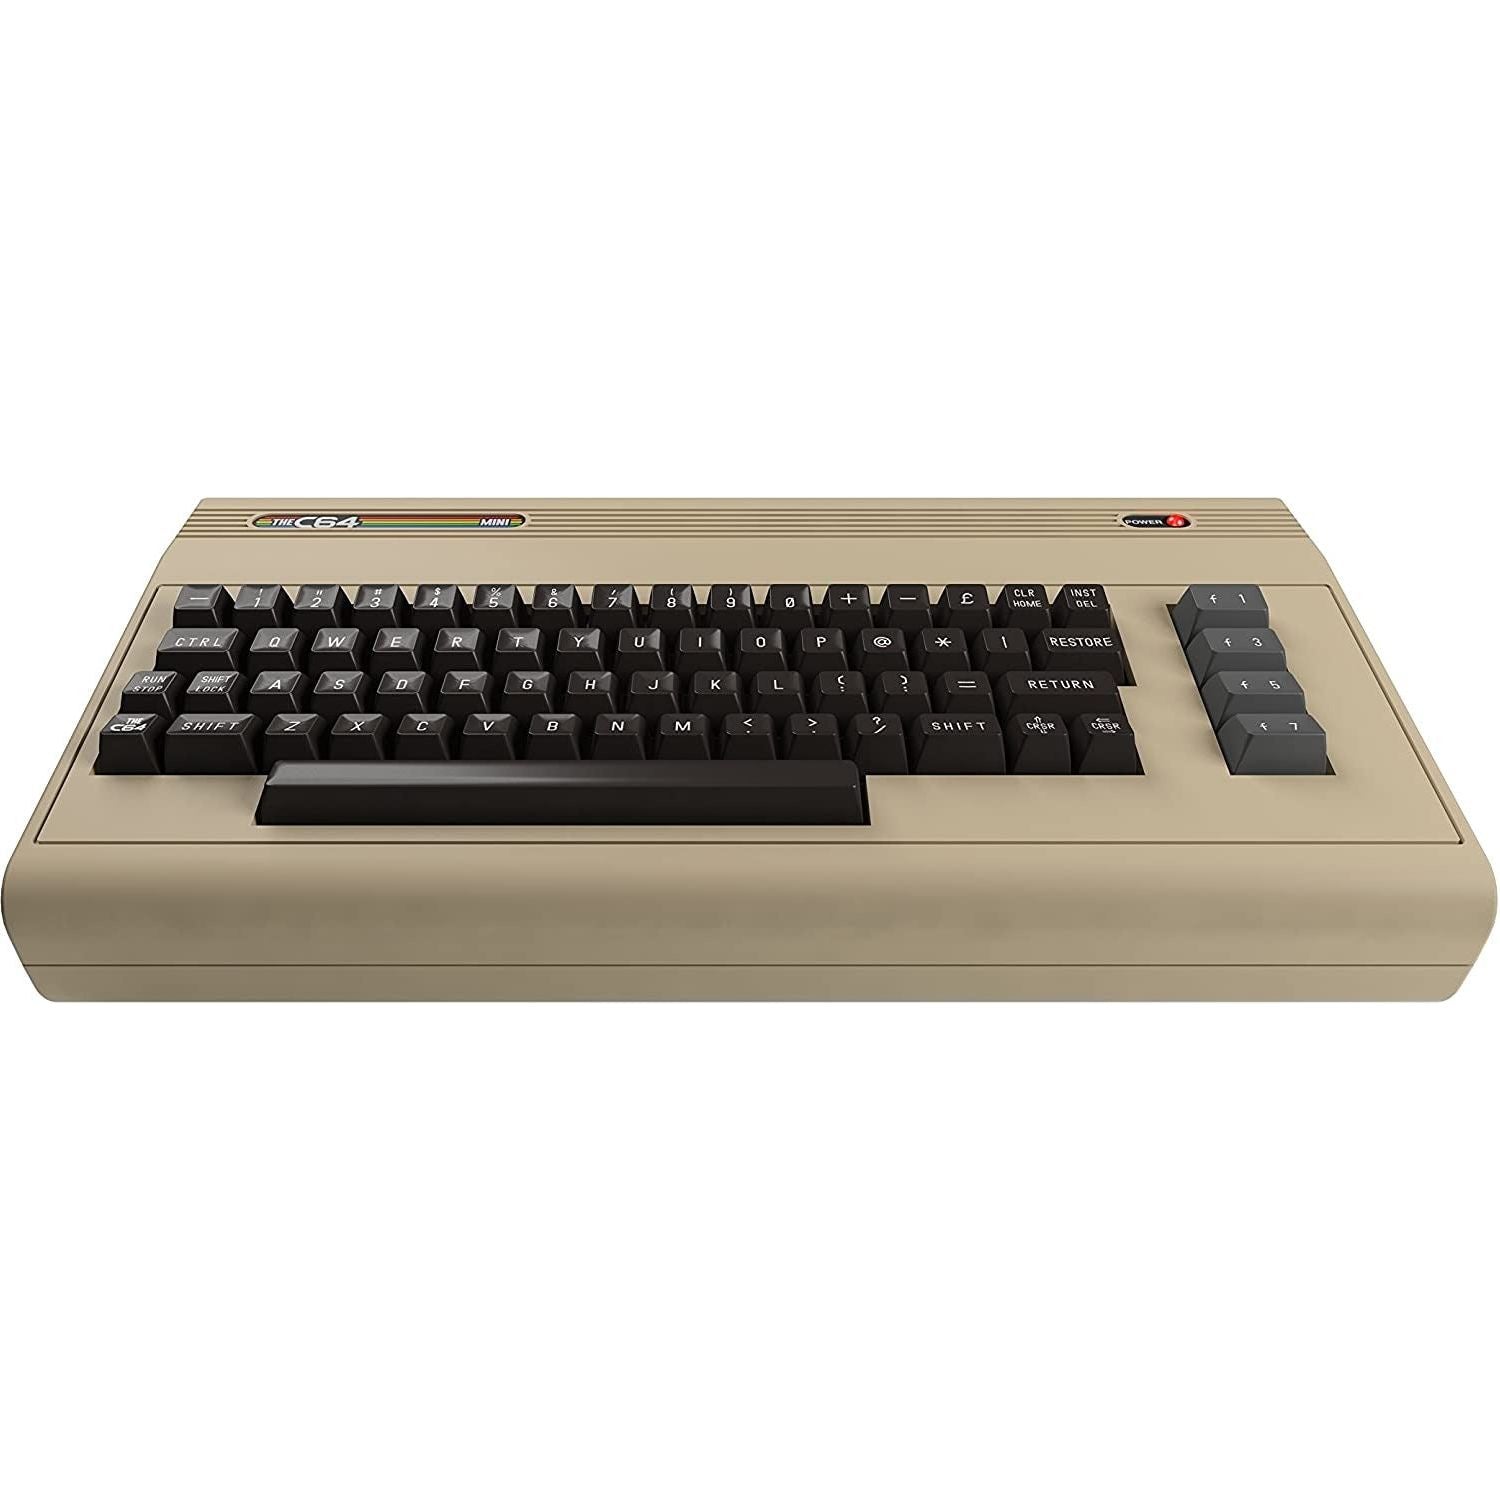 The C64 Mini (Out of Box)